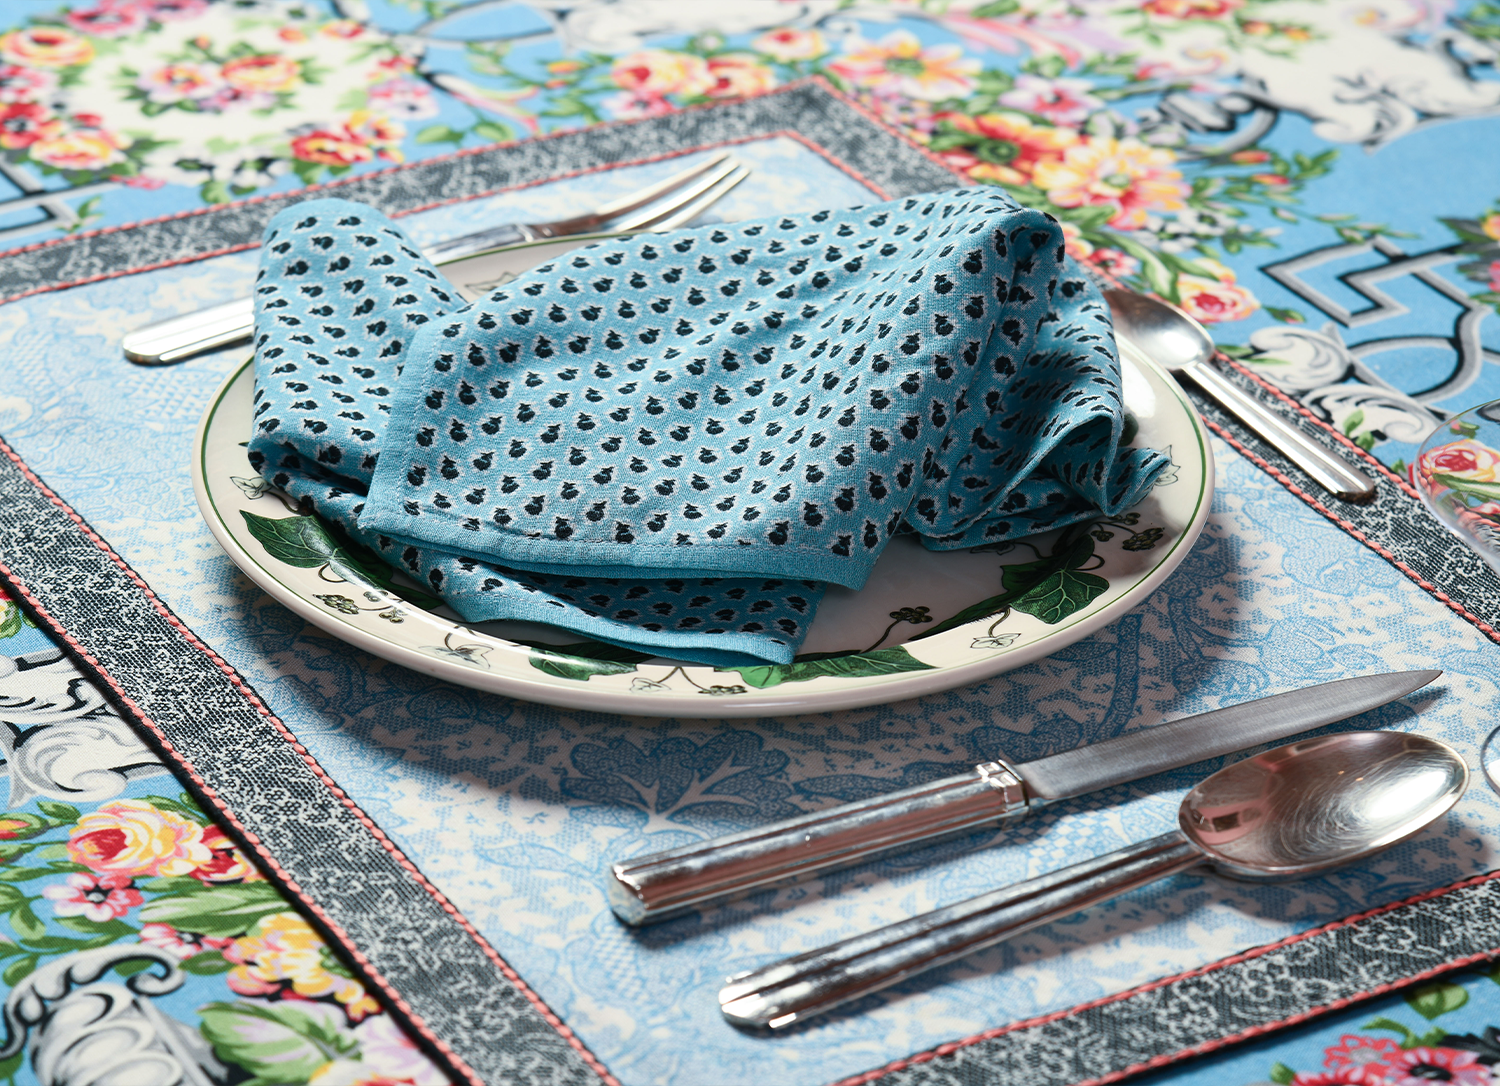 Types of Table Linens: Tablecloths, Napkins, & More